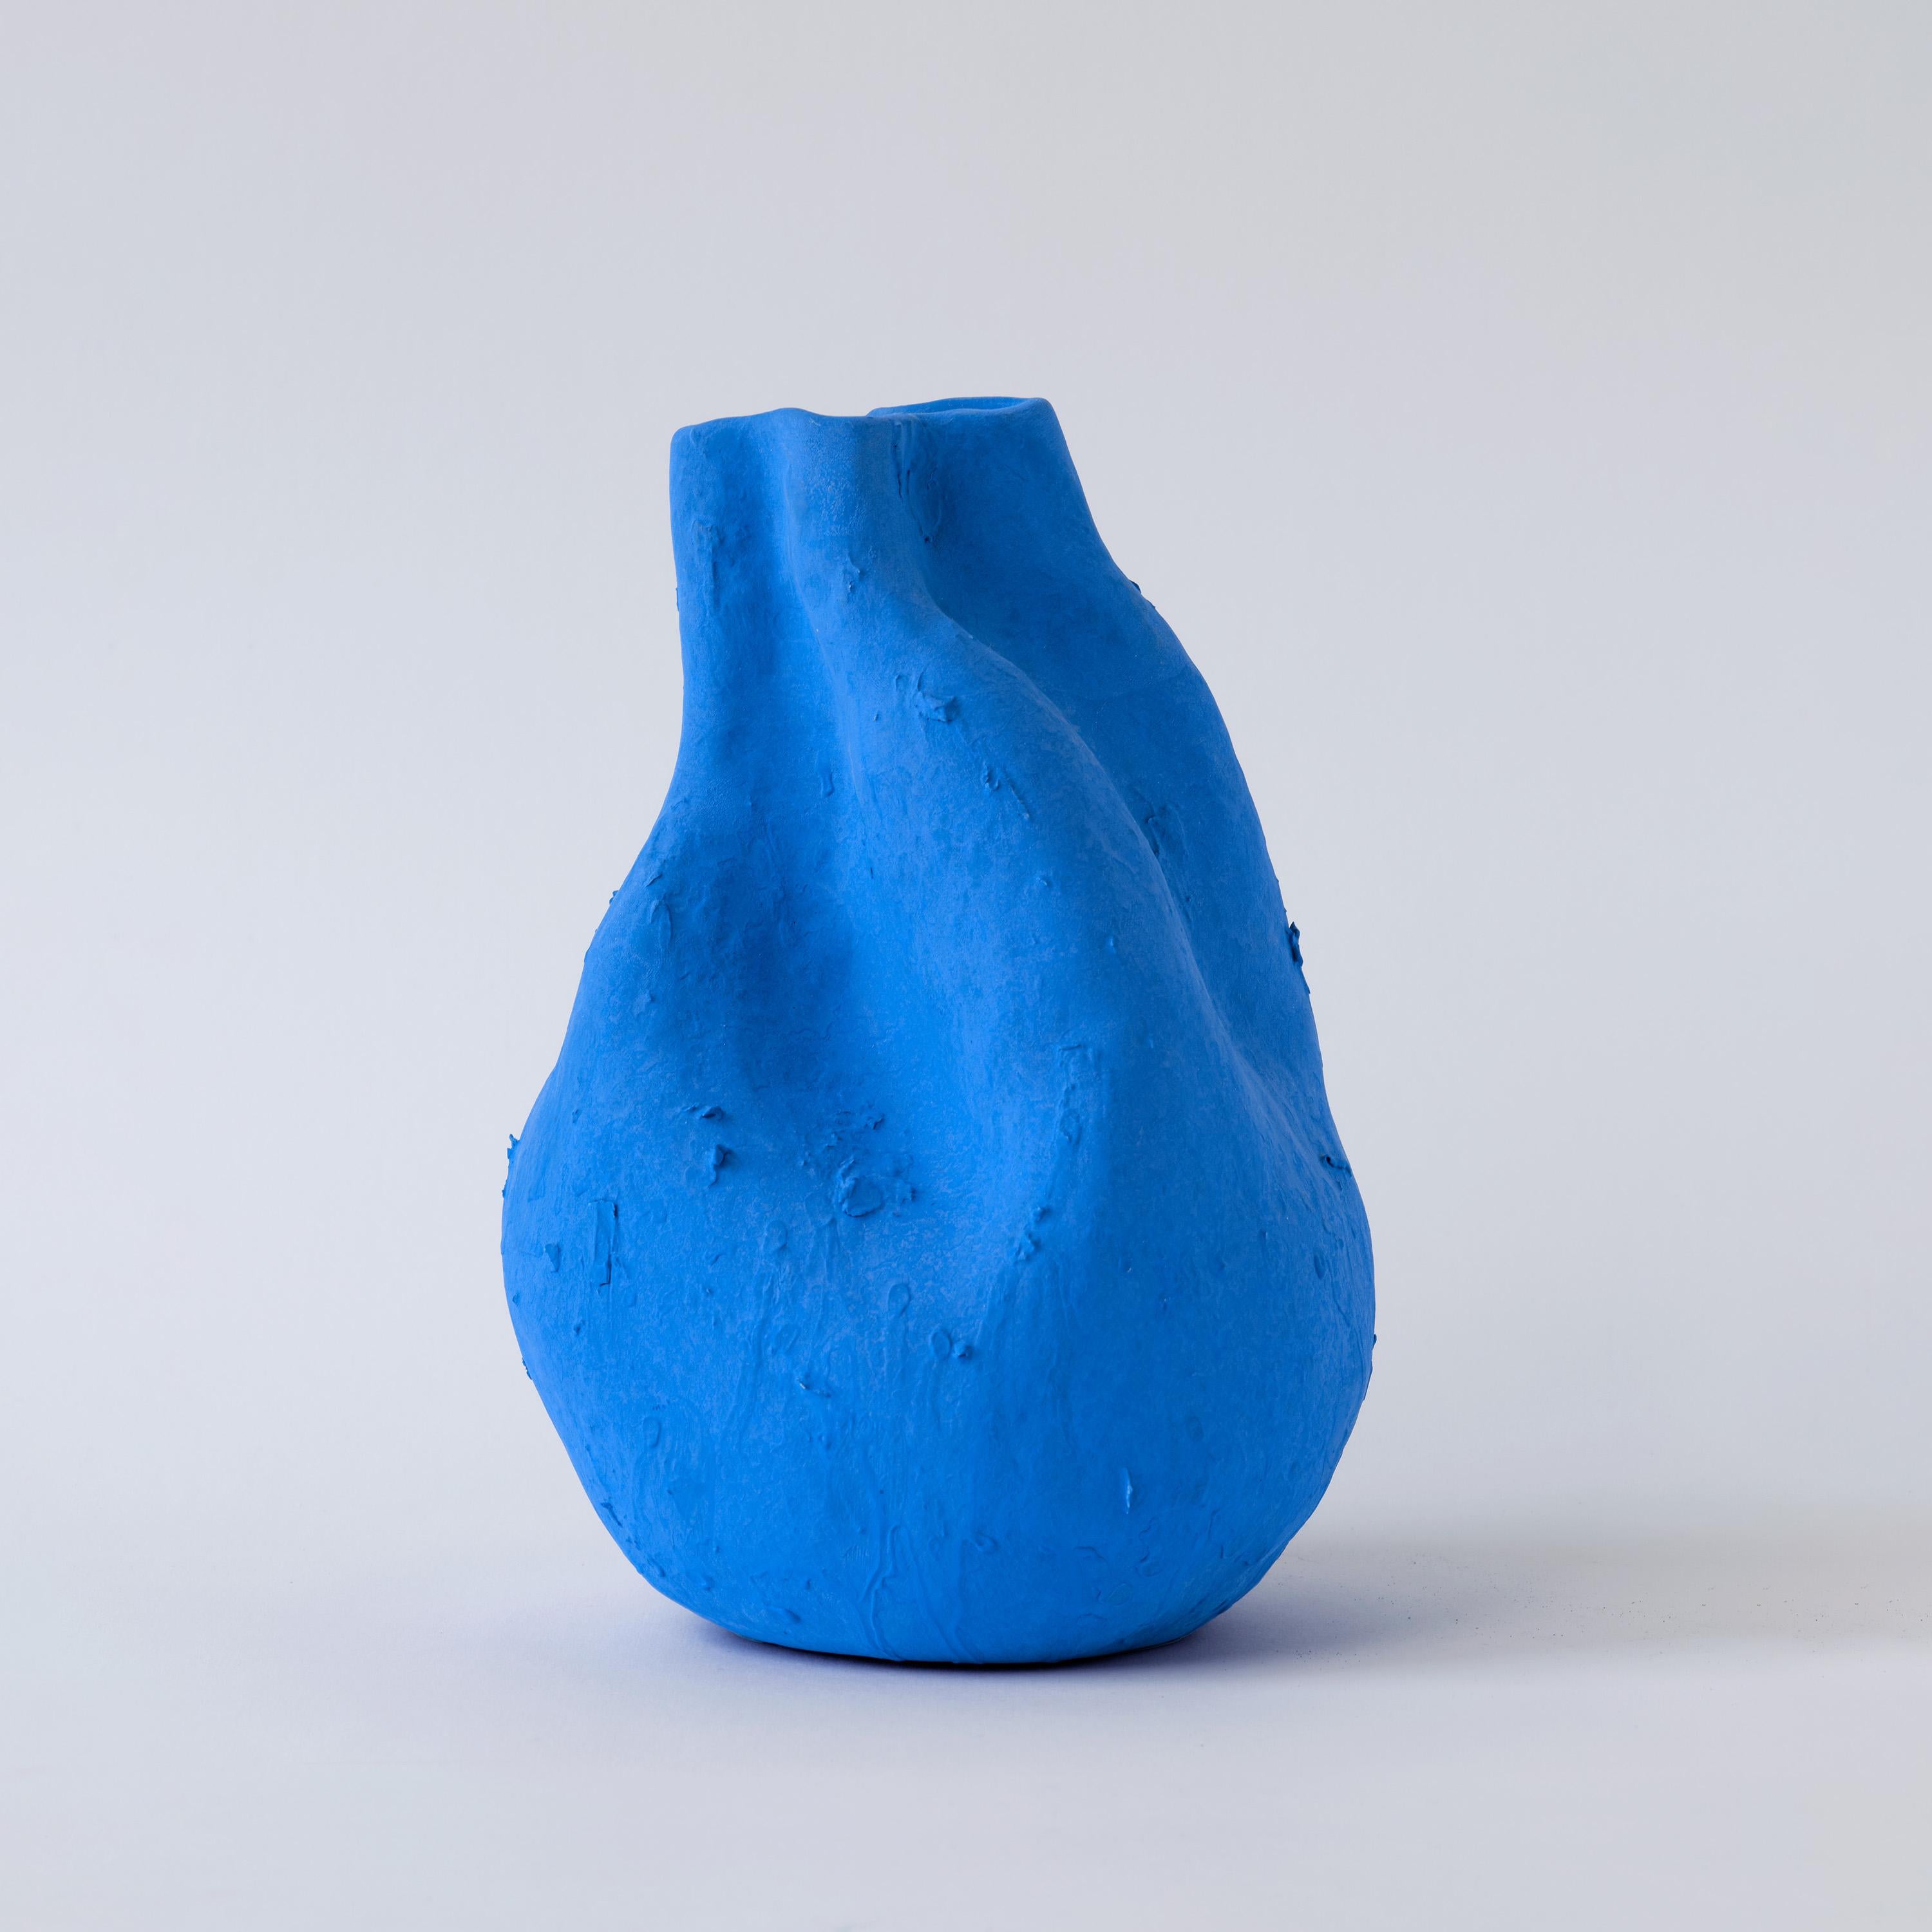 Immerse yourself in the true elegance of porcelain with the Alexis vase, embracing its serene matte blue hues that echo the boldness of Yves Klein's creativity. The vase's natural form highlights the authentic quality of porcelain, while its glossy